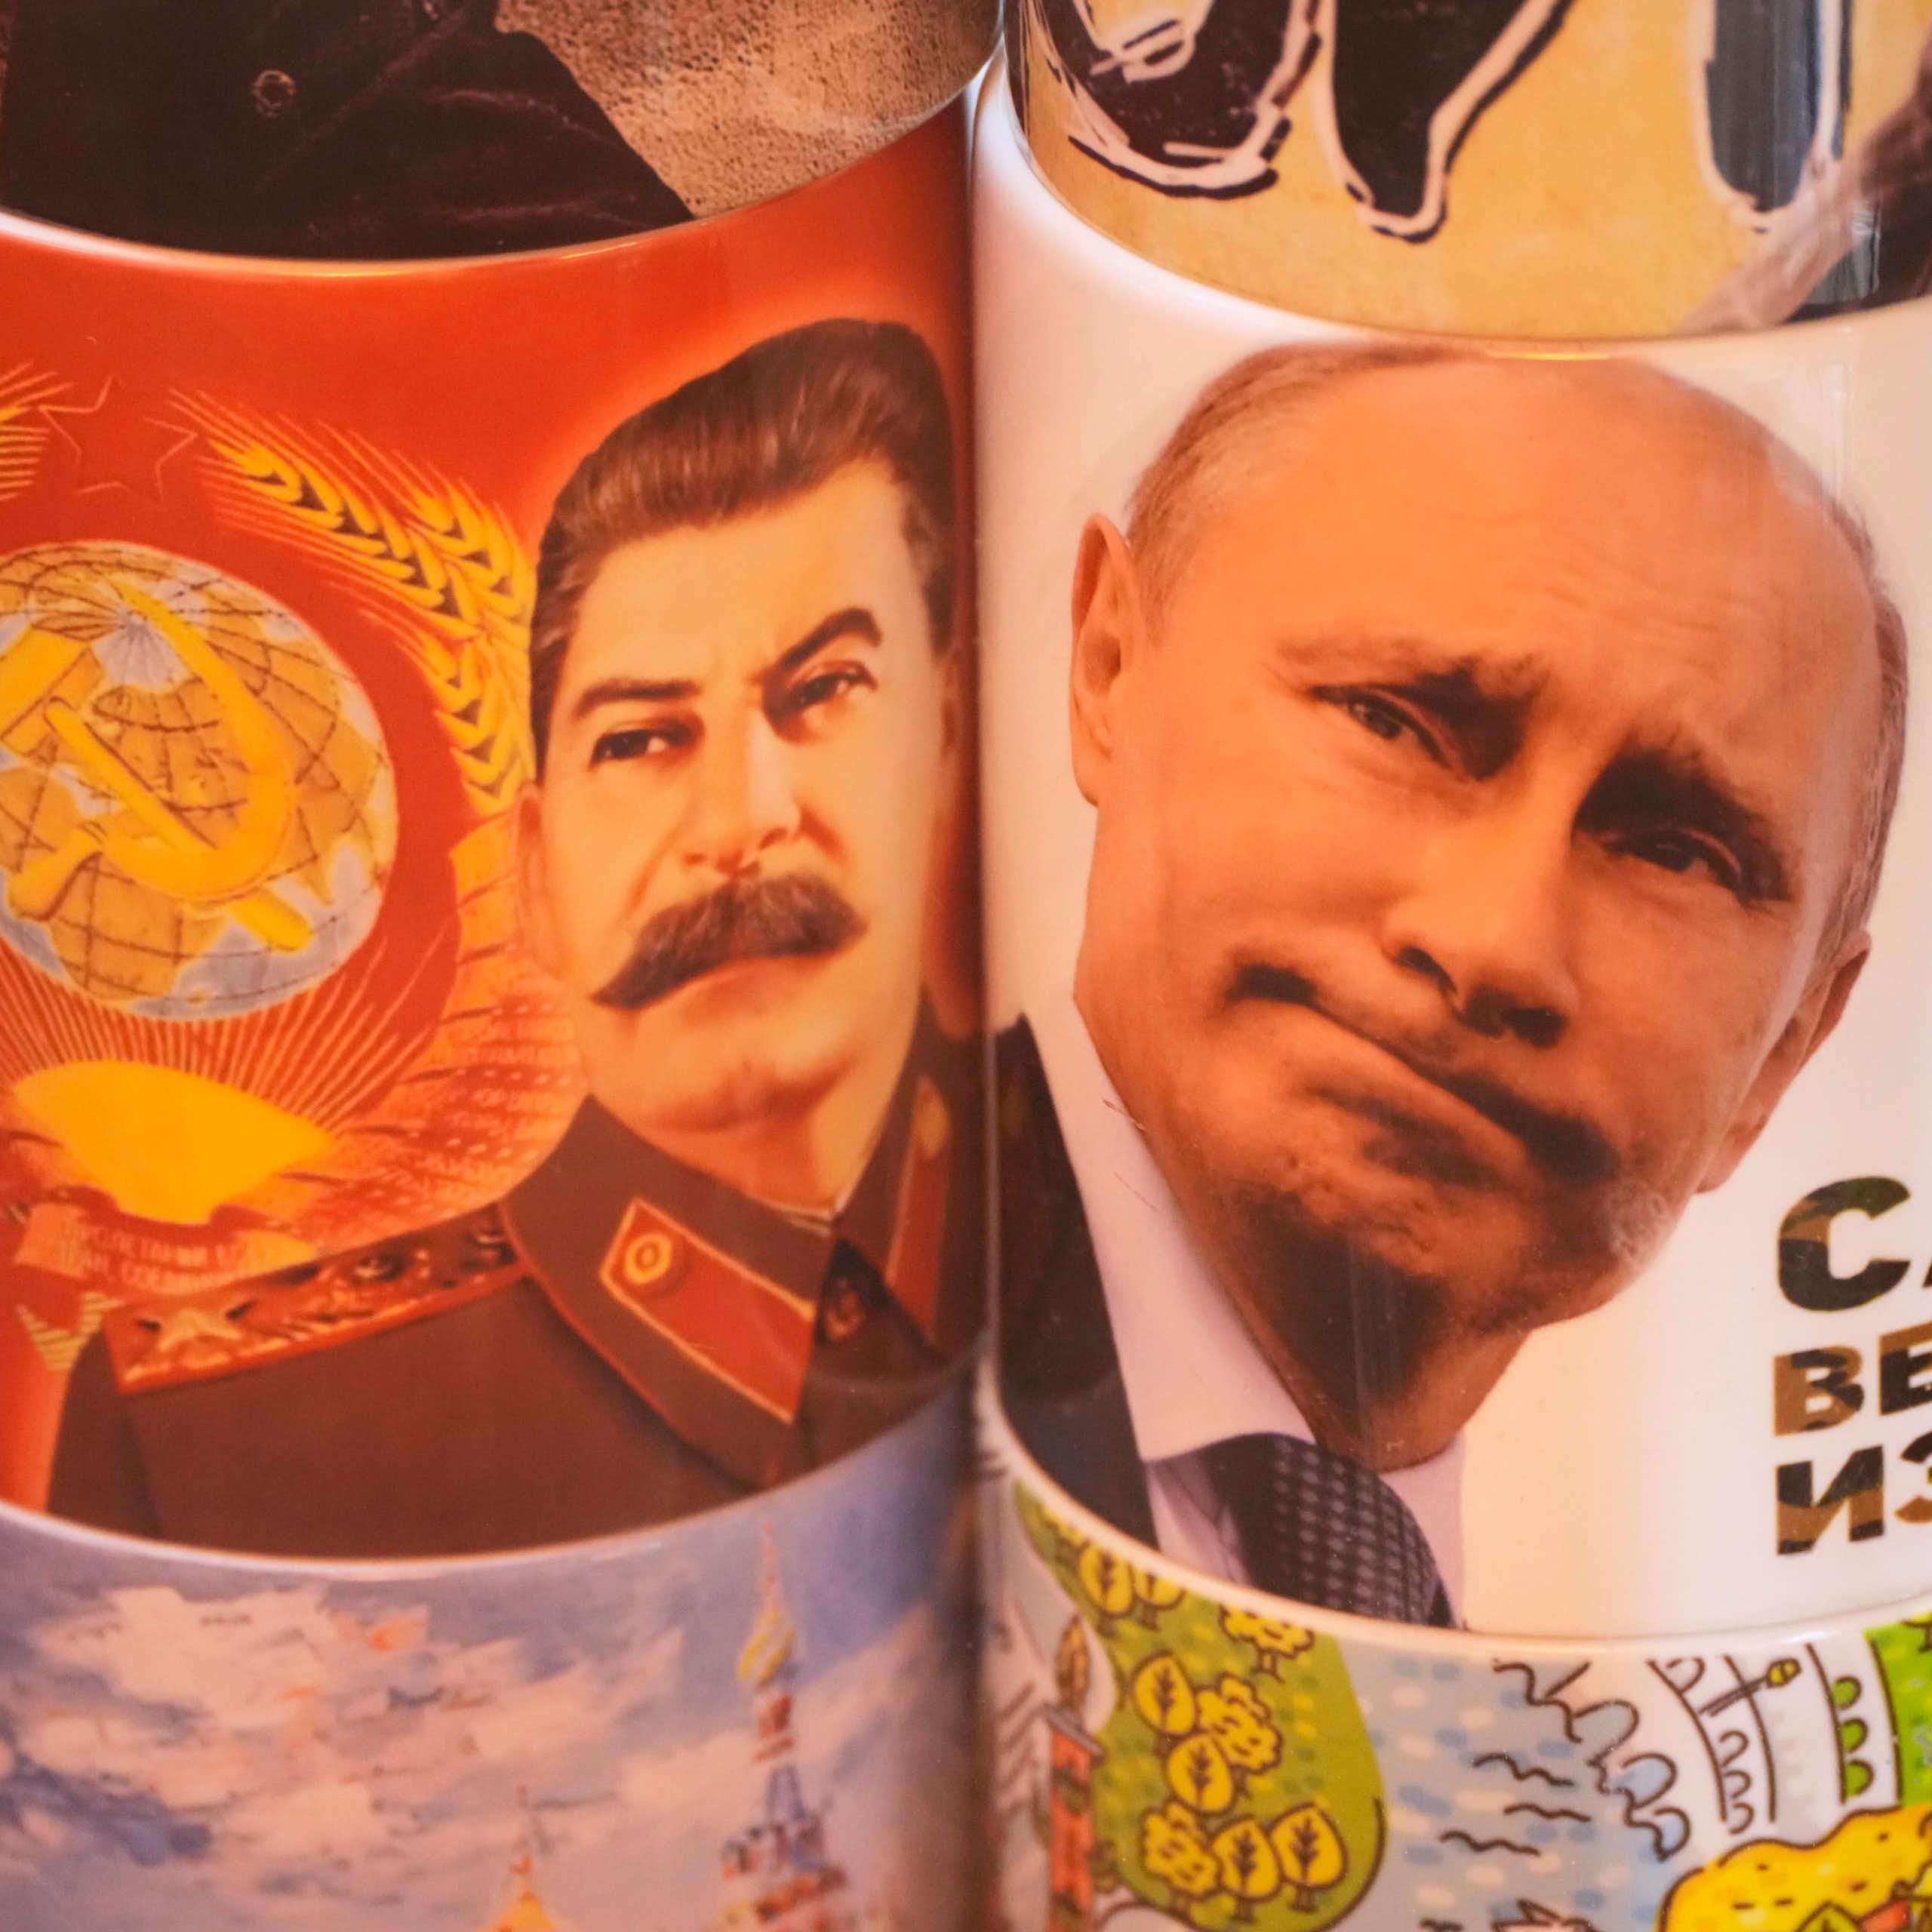 Two cups display the faces of Stalin and Putin.